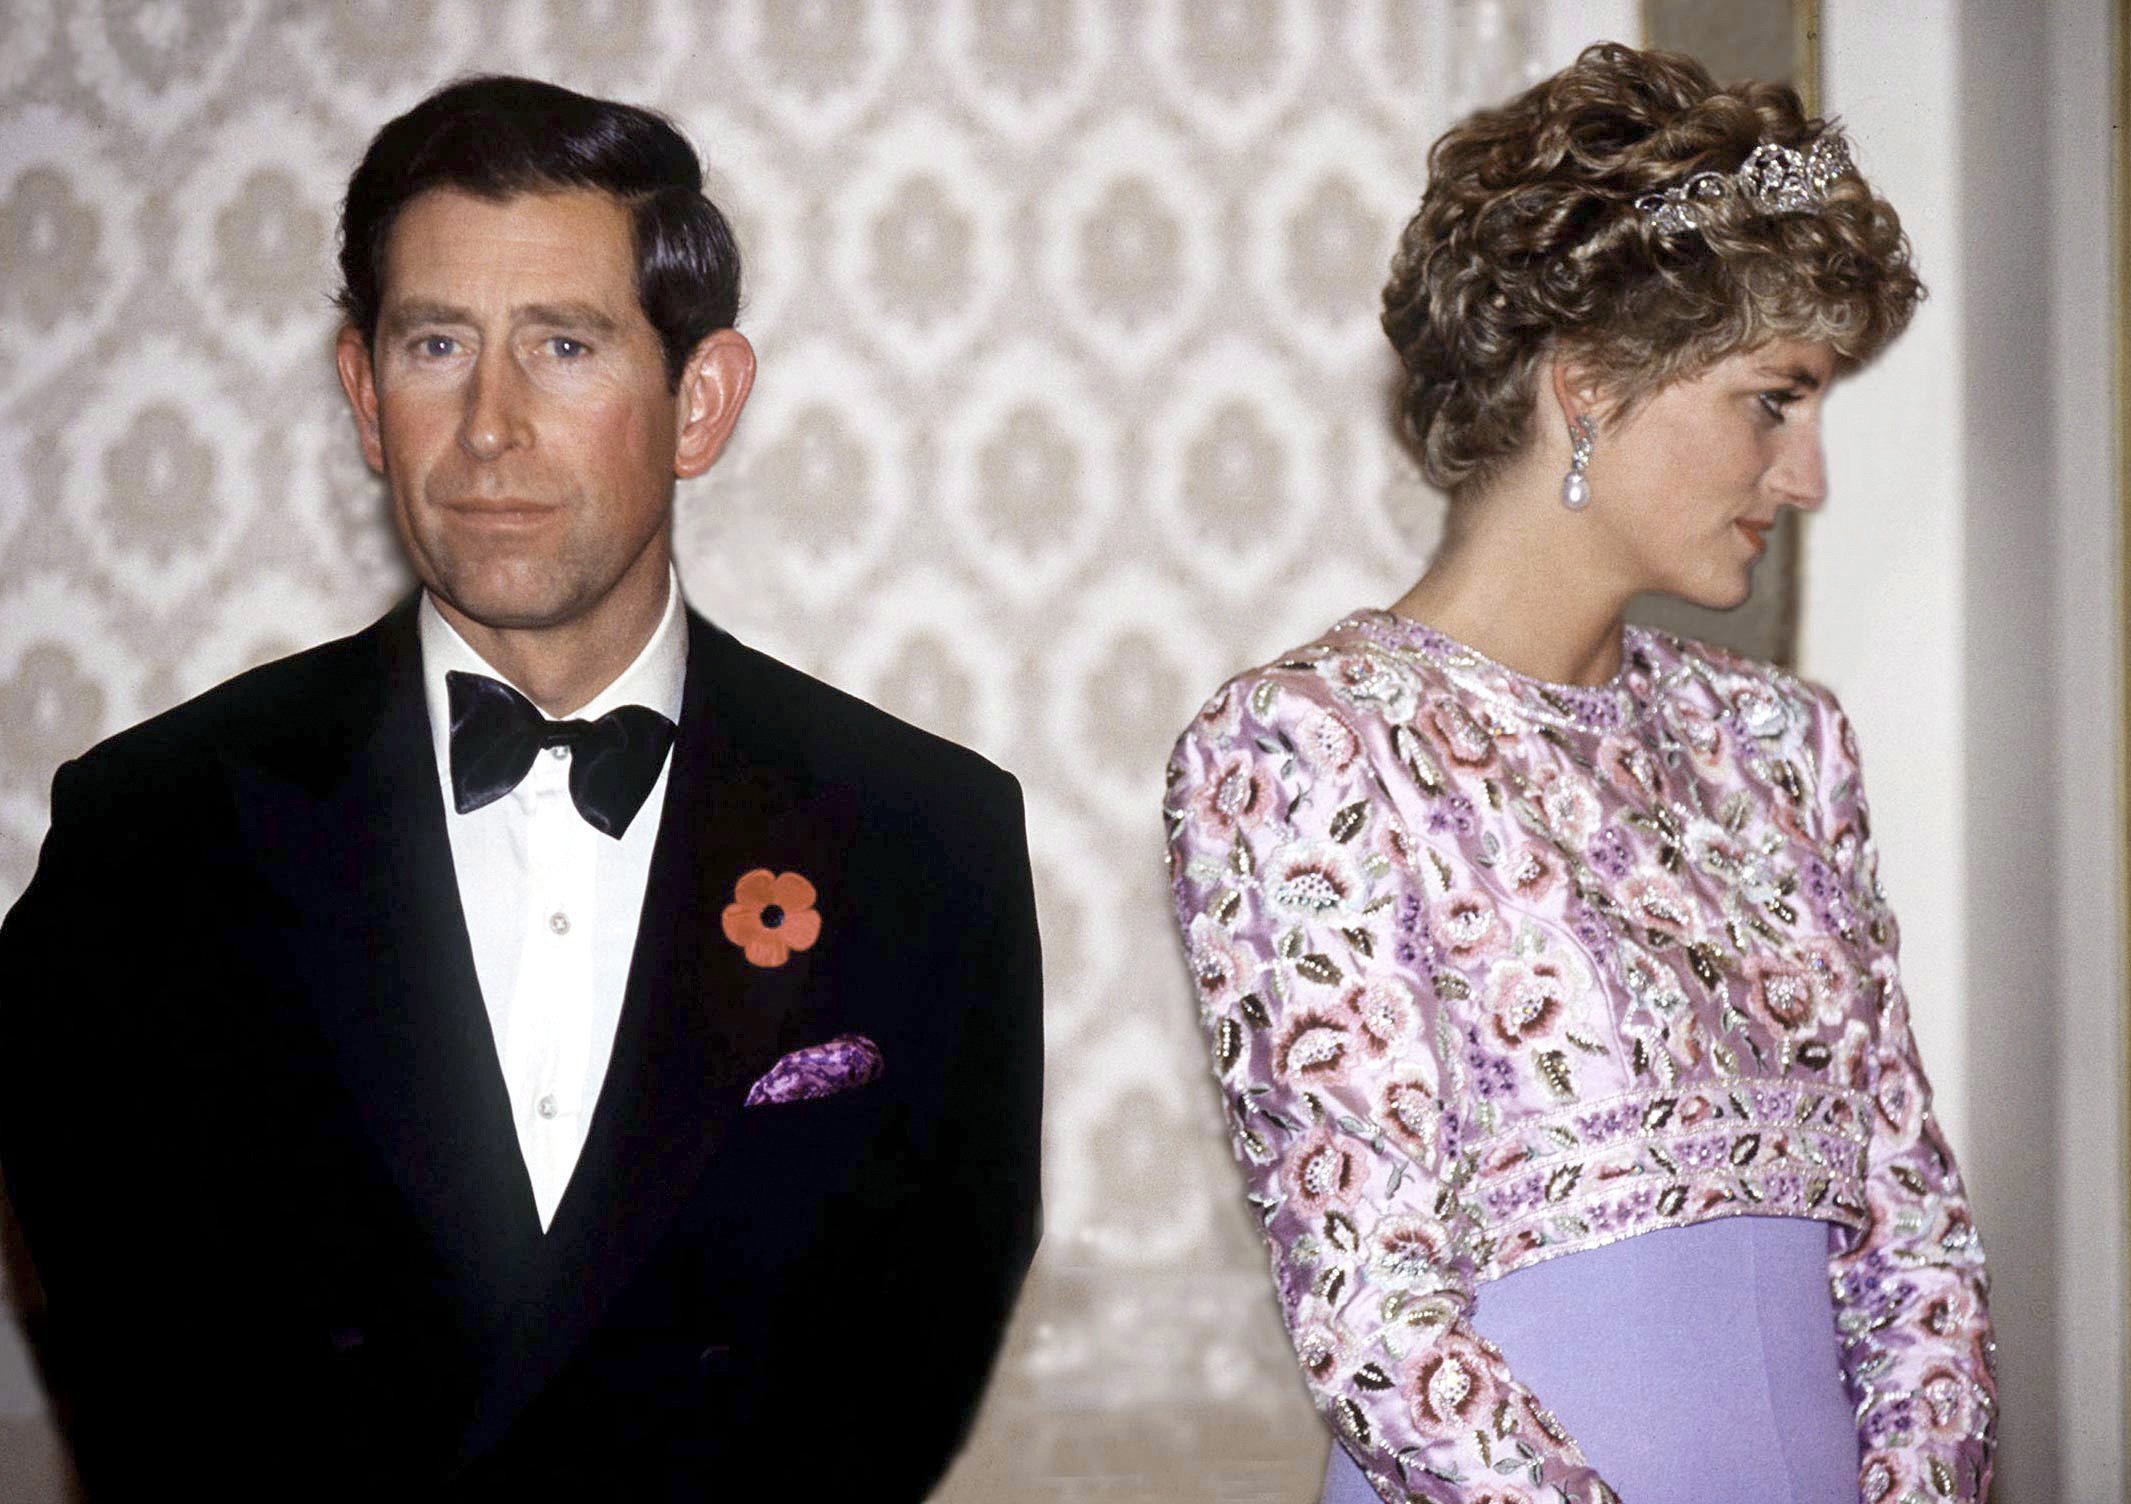 Prince Charles and Princess Diana in Seoul on November 3, 1992 | Photo: Getty Images